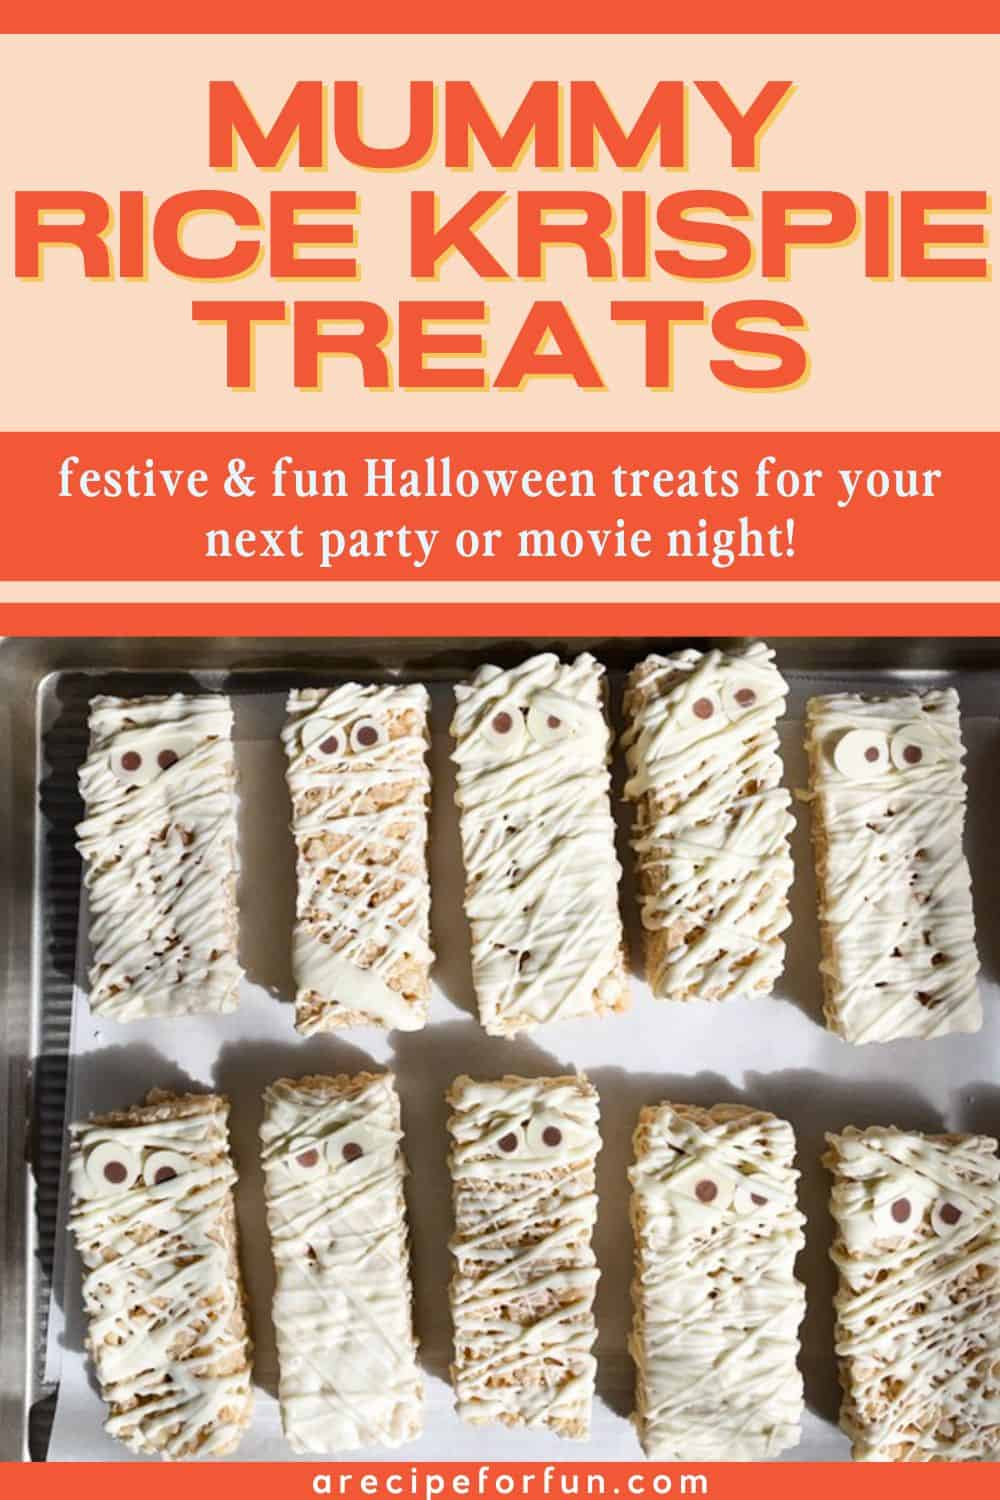 Pinterest Pin for a post about a recipe for mummy rice krispie treats.